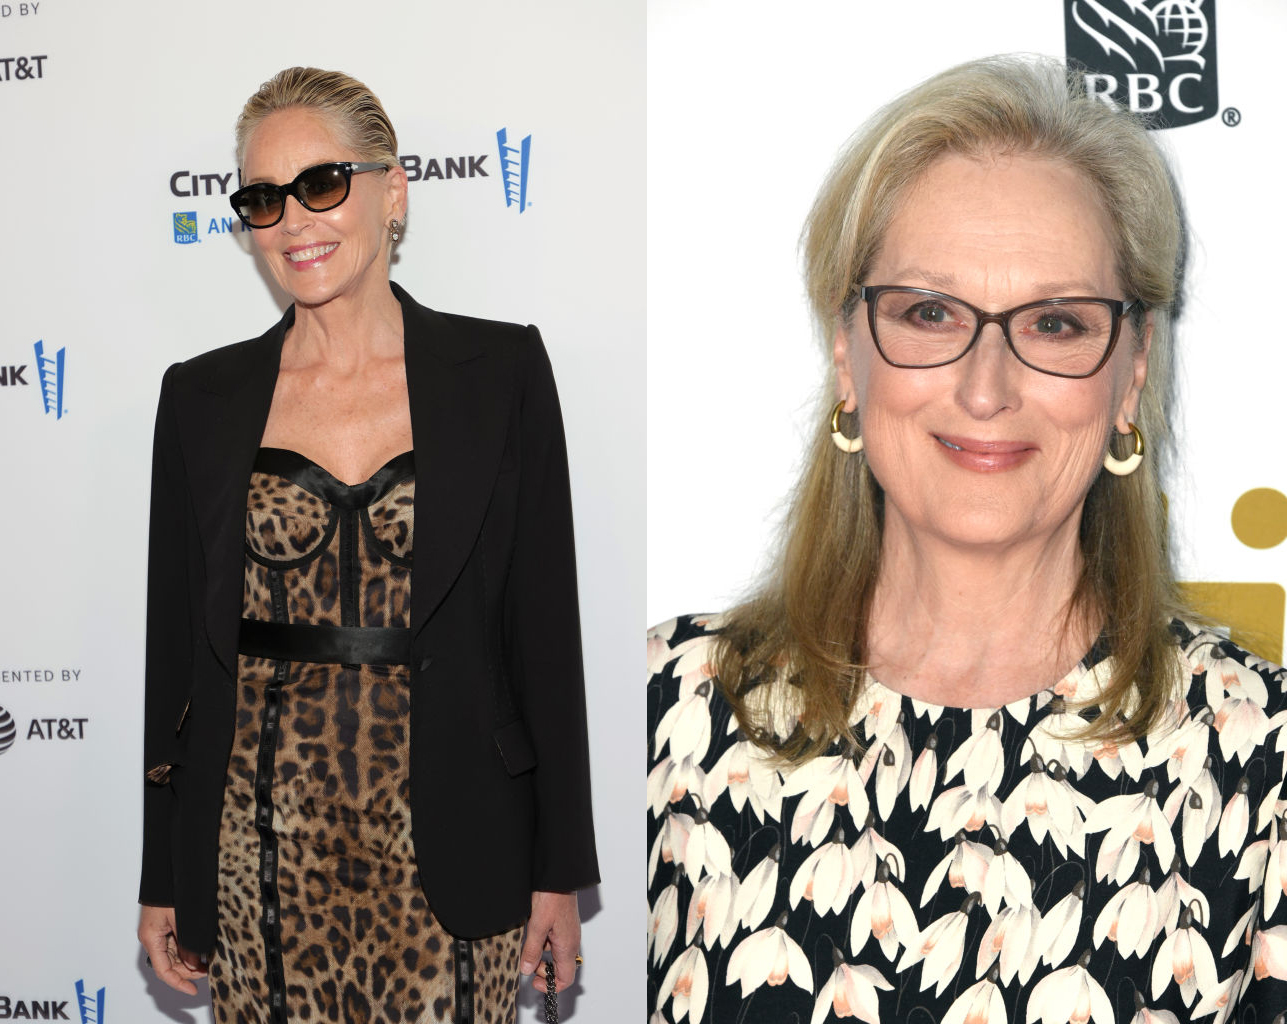 Sharon Stone Subtly Disses Meryl Streep During Interview Saying Others Could Be Icons Too